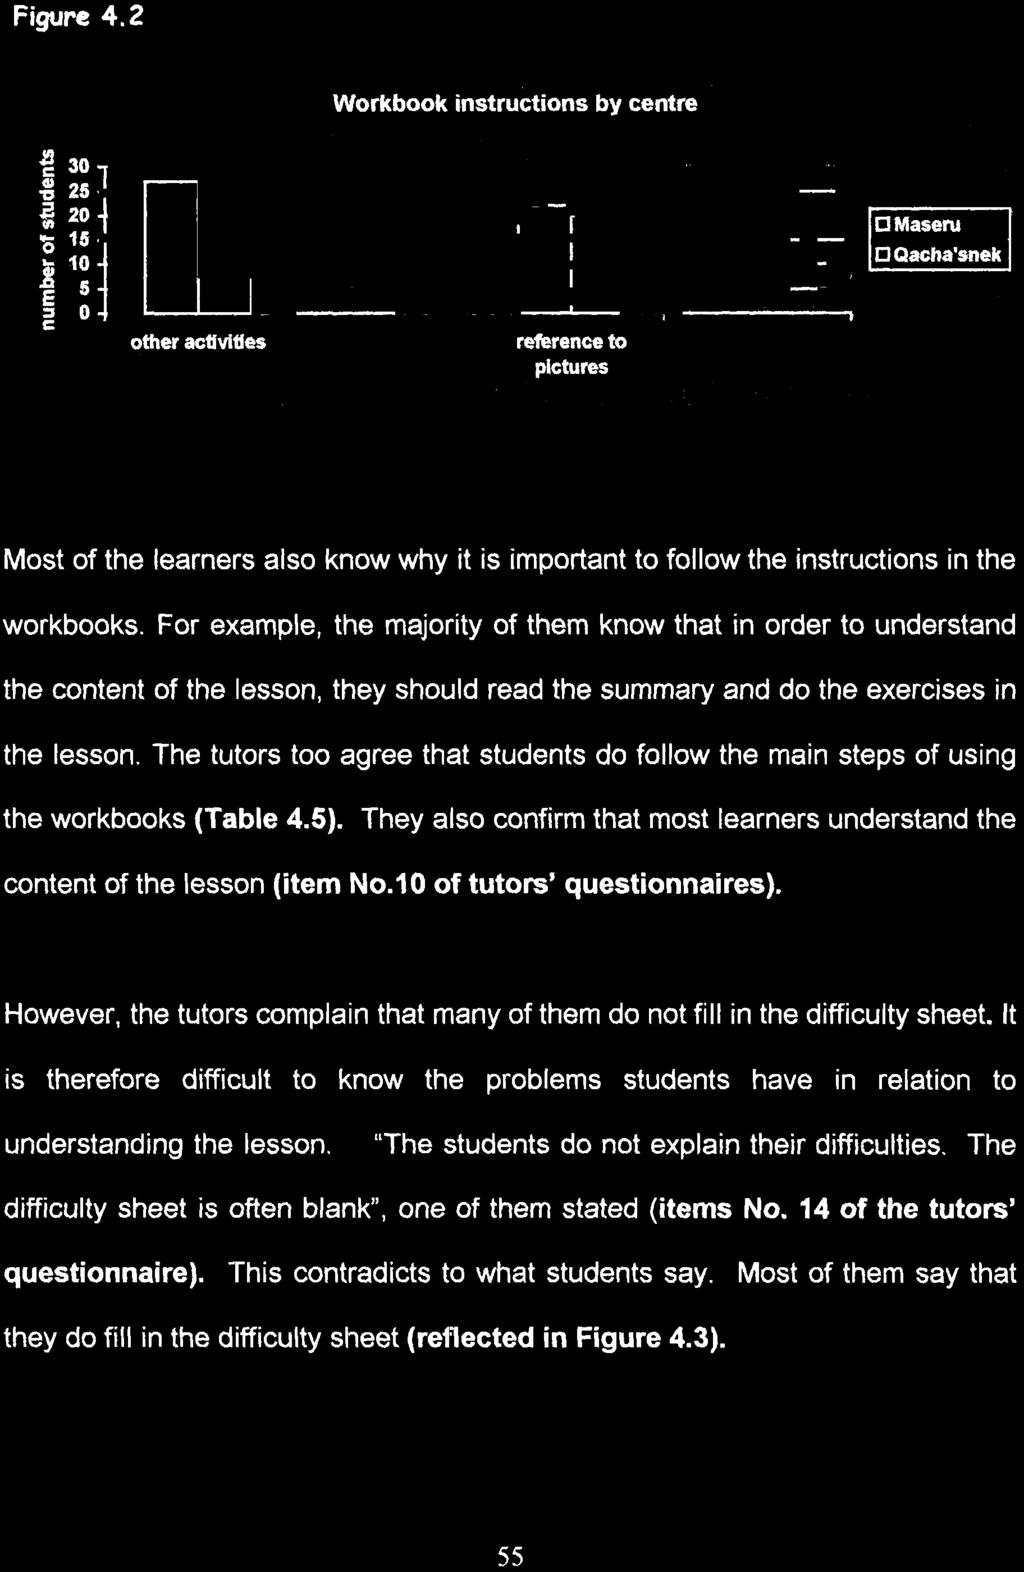 The tutors too agree that students do follow the main steps of using the workbooks (Table 4.5). They also confirm that most learners understand the content of the lesson (item No.